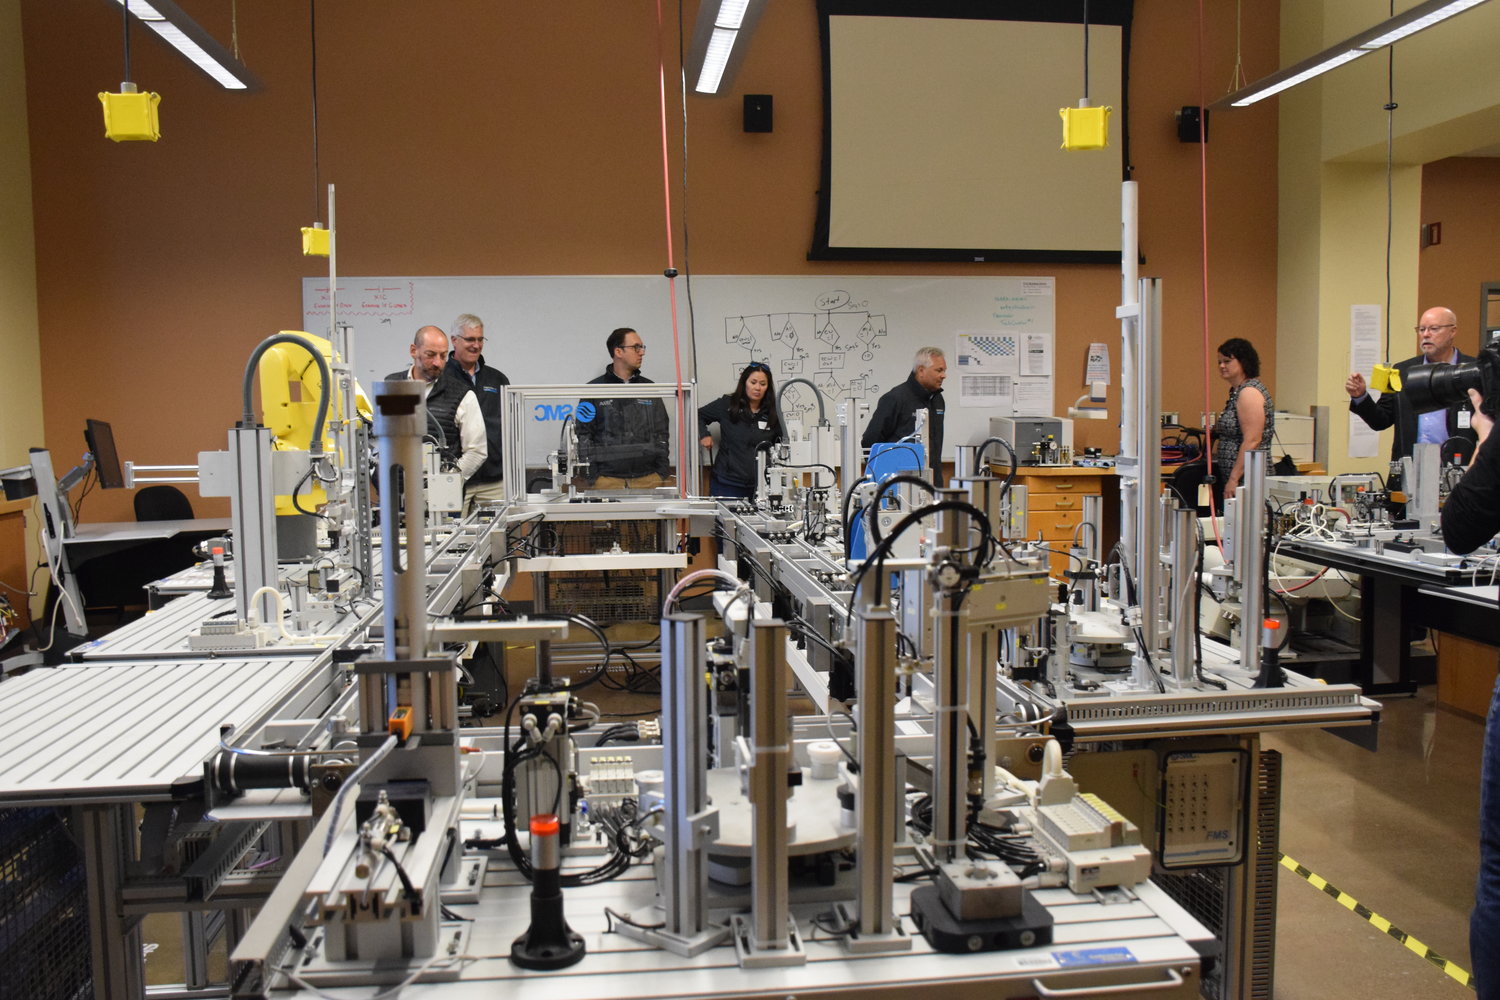 The Association of Washington Business’ Manufacturing Week bus tour participants look at one of the labs at Clark College’s Columbia Tech Center campus on Oct. 10.